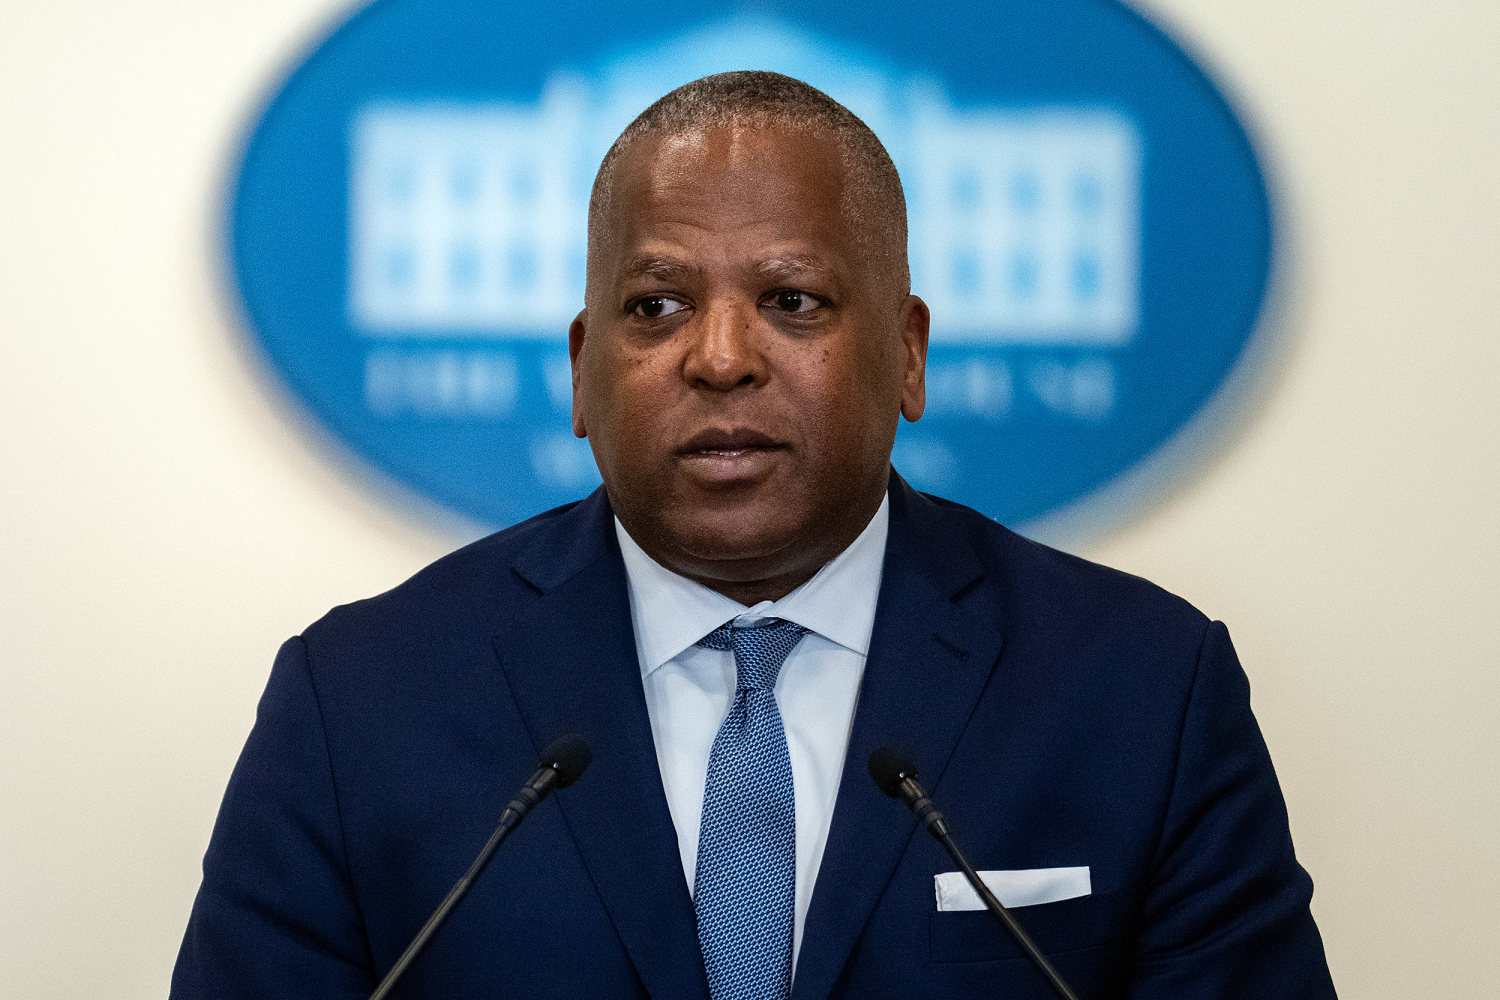 White House sends official to Morehouse to address concerns ahead of Biden's speech